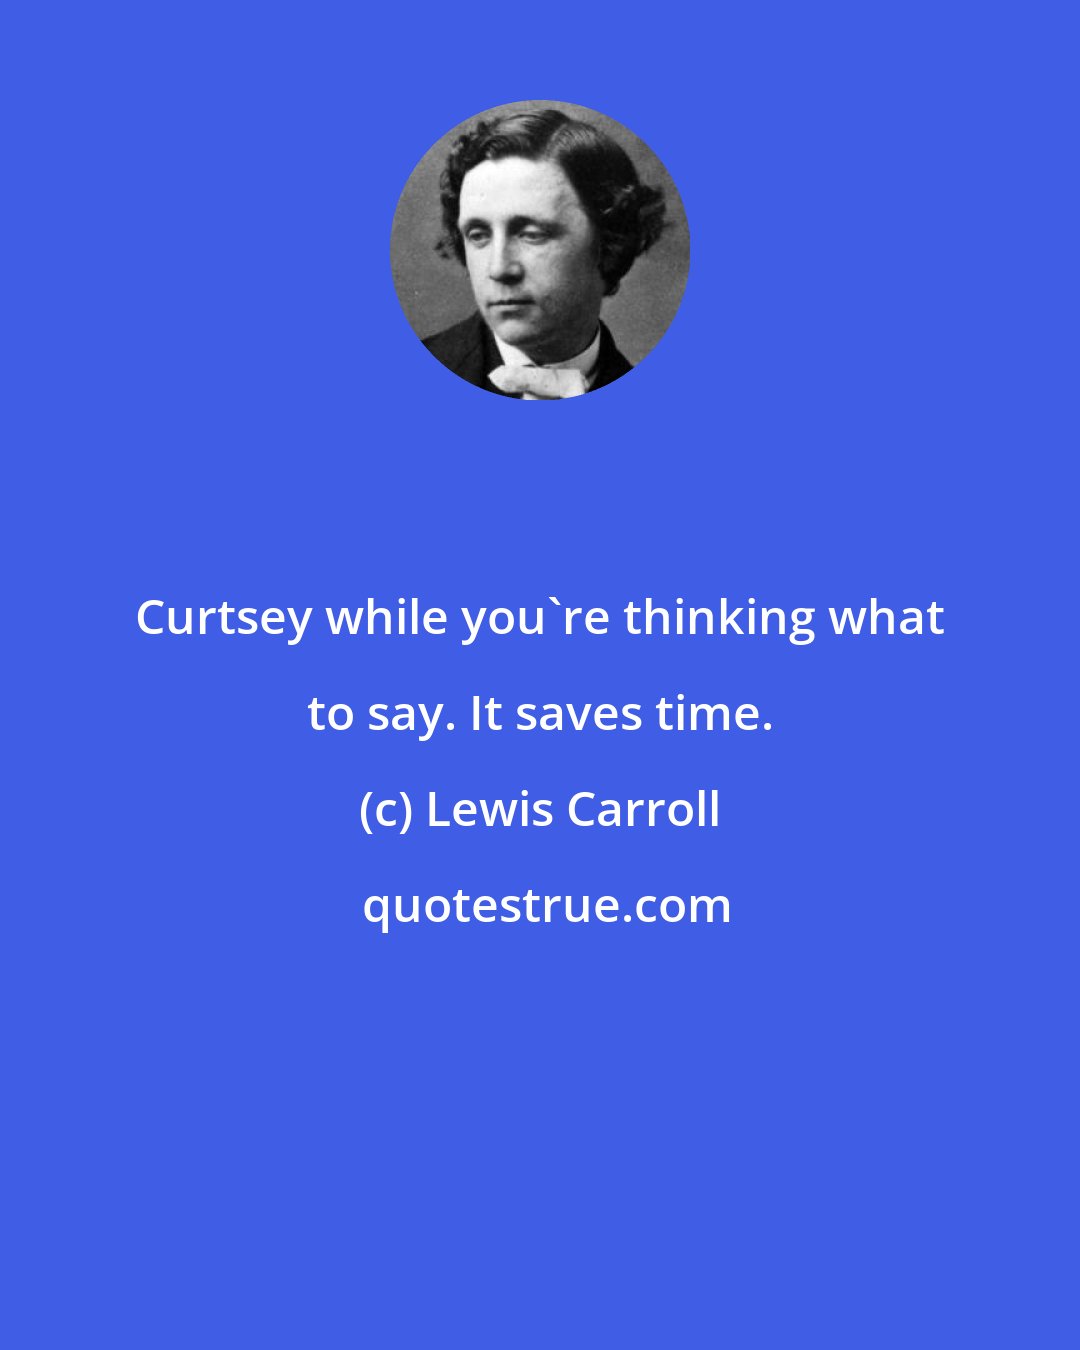 Lewis Carroll: Curtsey while you're thinking what to say. It saves time.